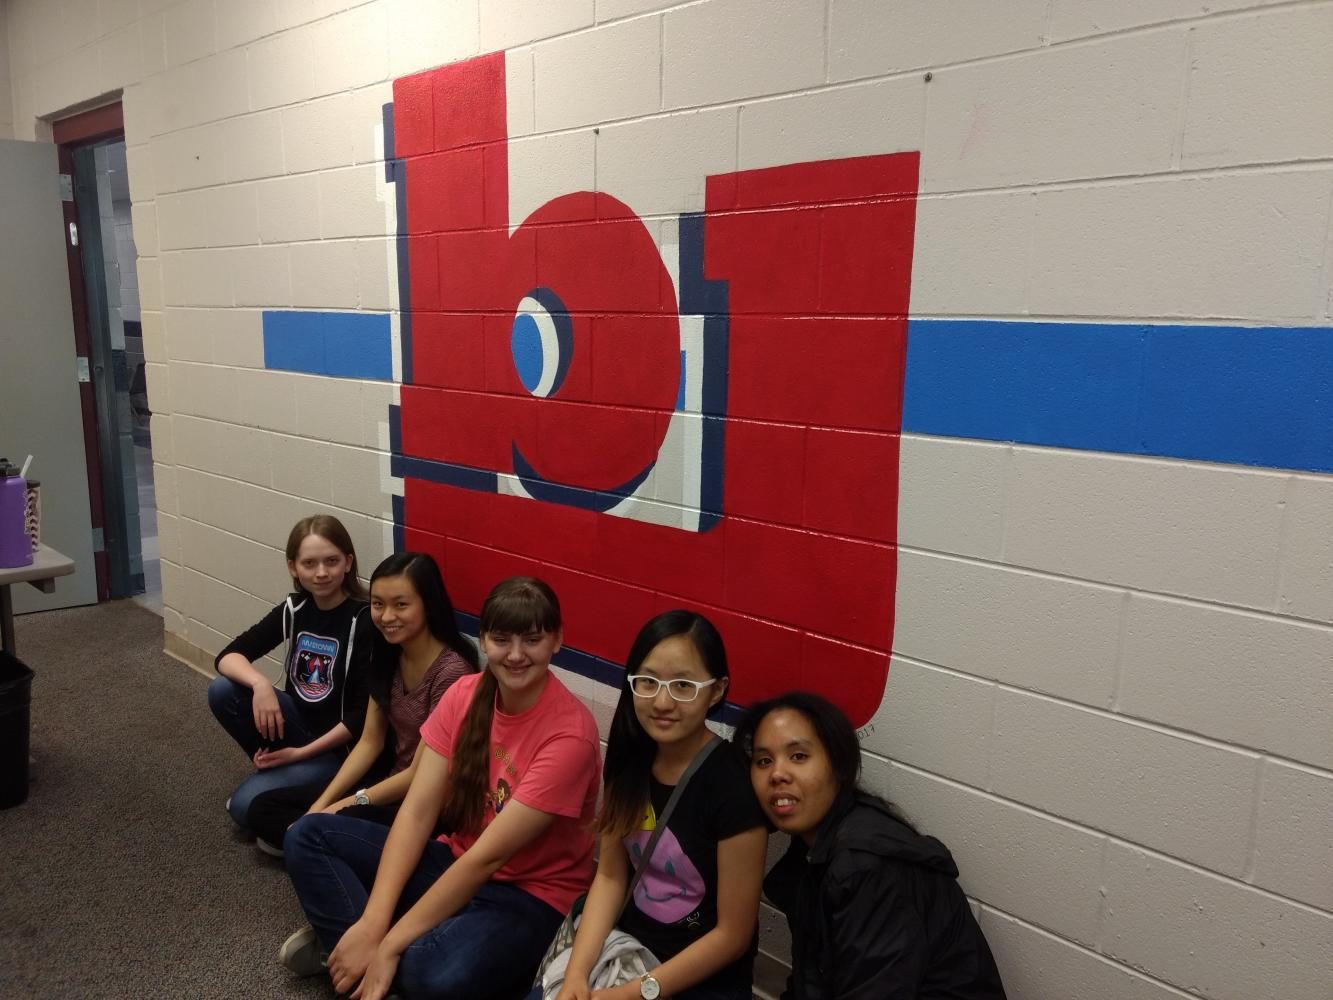 This photo was taken after a few art club members completed a small mural in one of the SRO officers rooms here at Bob Jones.